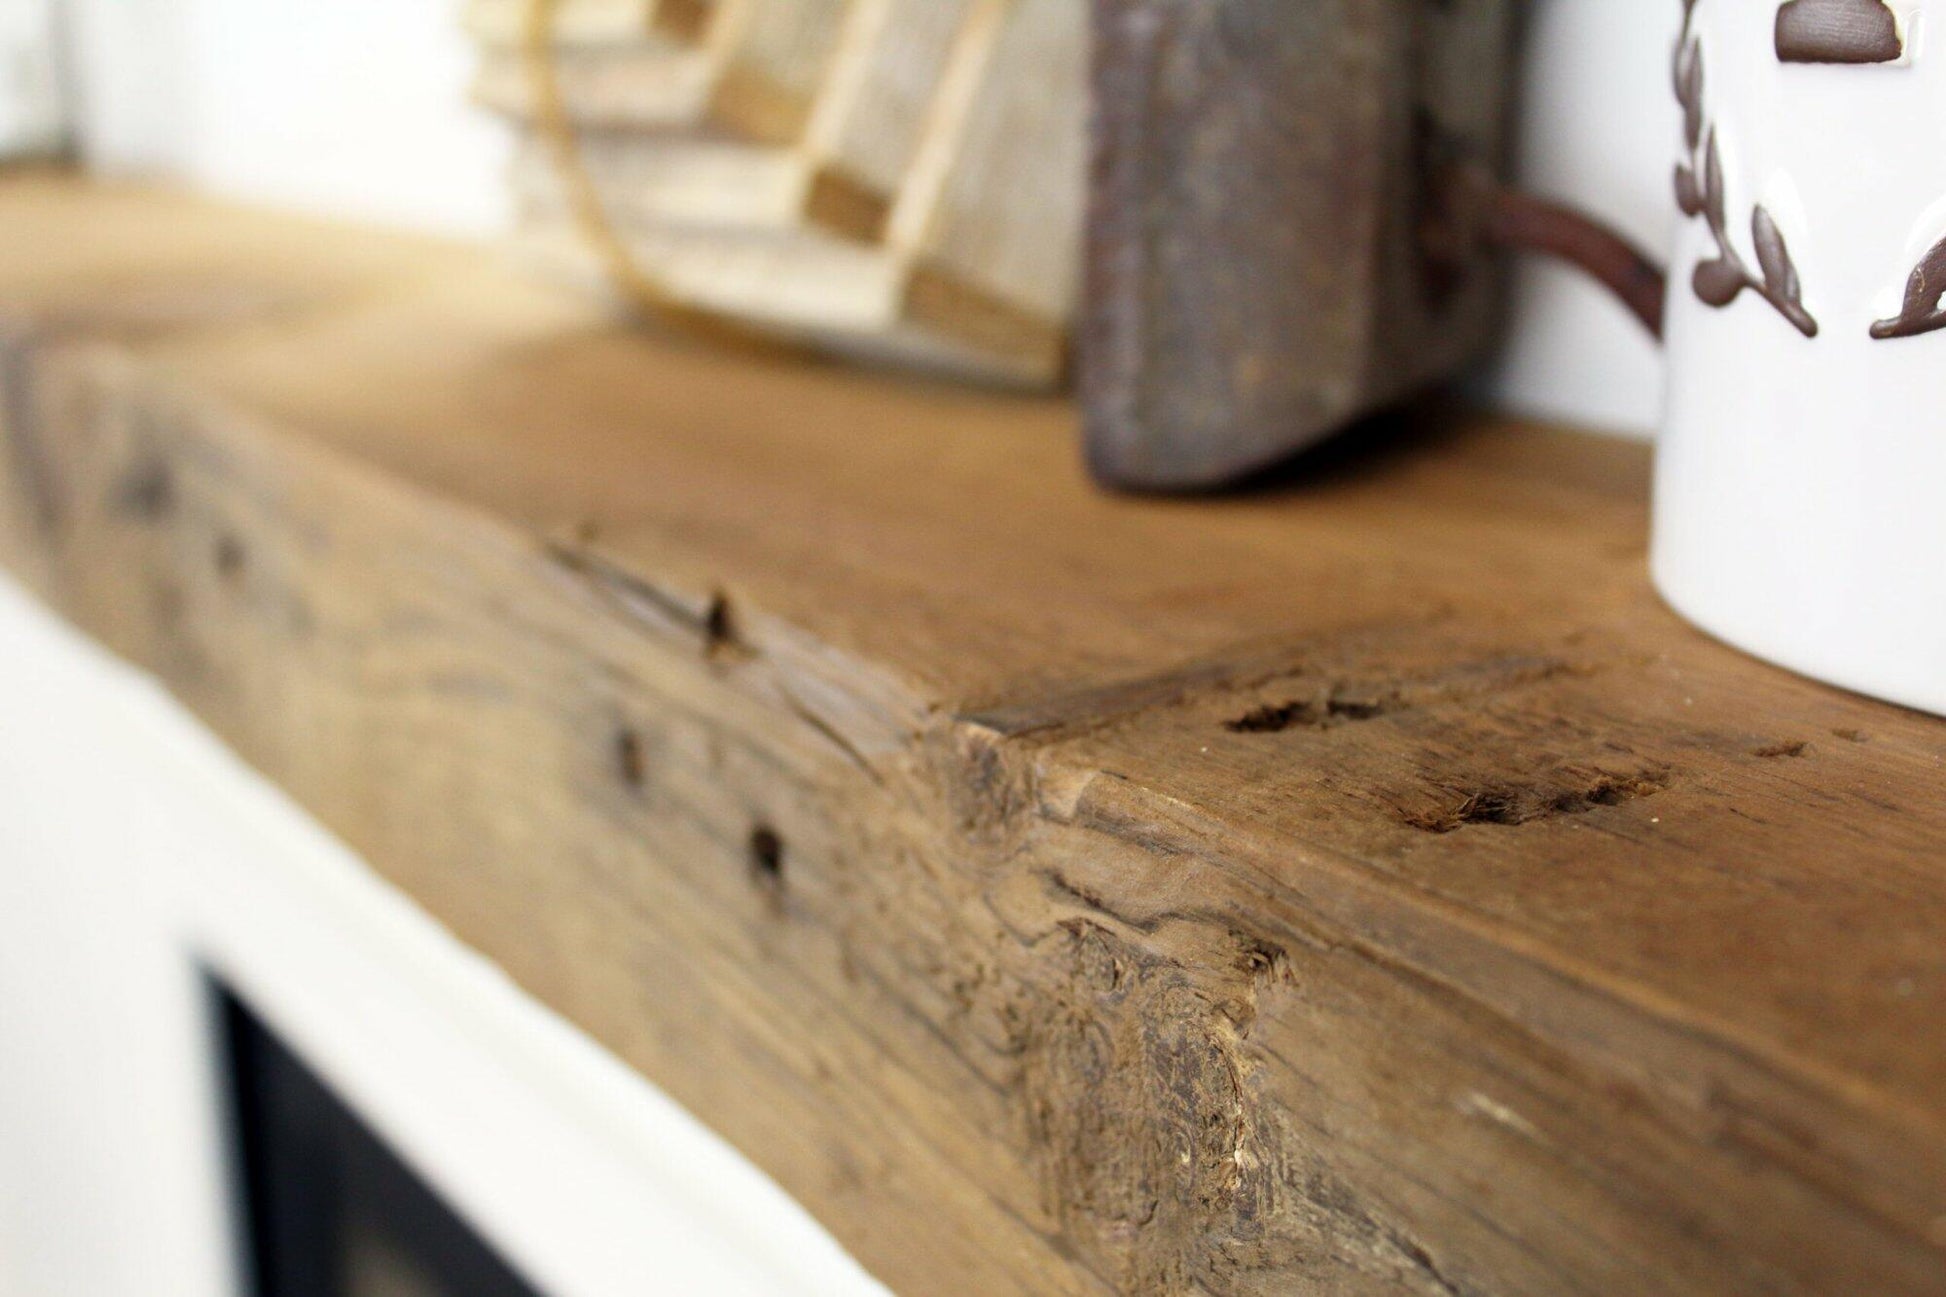 a close up of the top side of a skip-planed reclaimed barnwood fireplace mantel in the natural option. Close up images shows grain pattern, wood texture, knots, nail holes, and other variations in the wood.